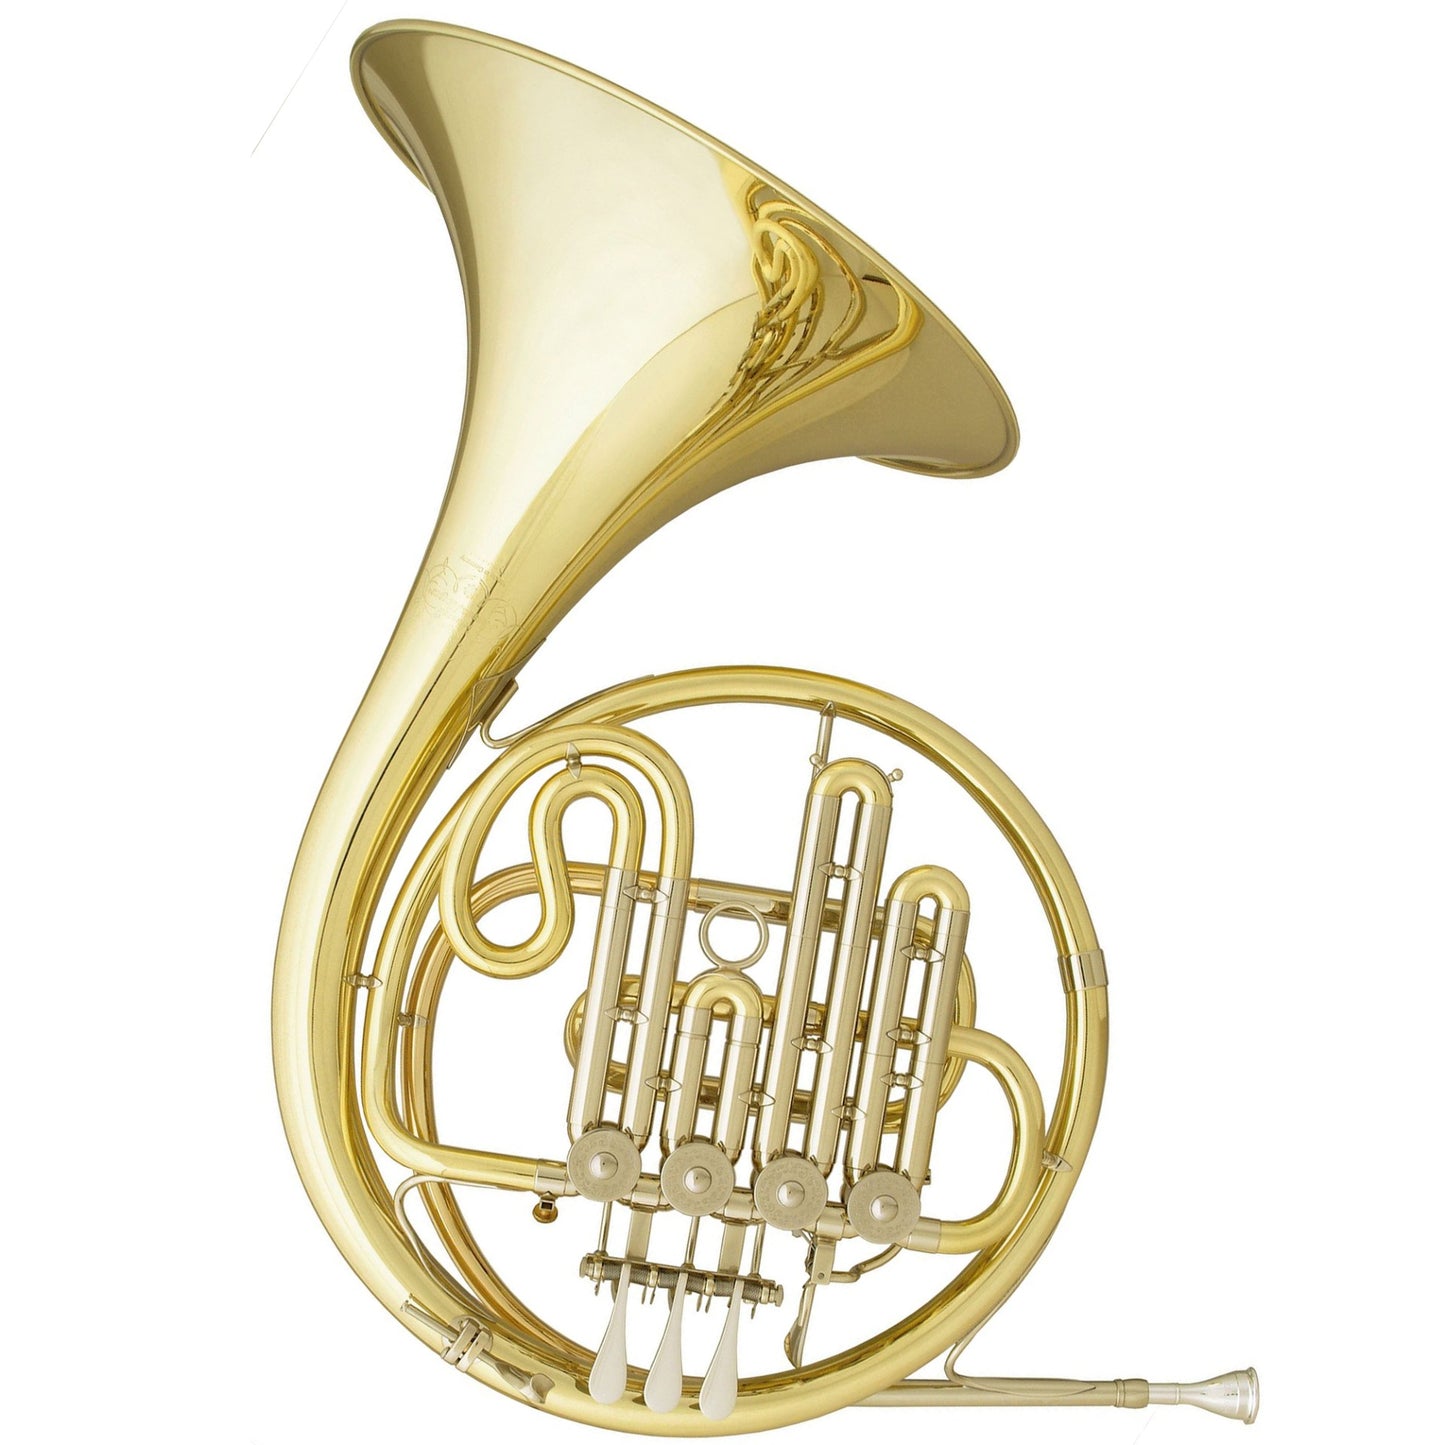 Yamaha YHR668DII Professional Model double French horn With Detachable Bell